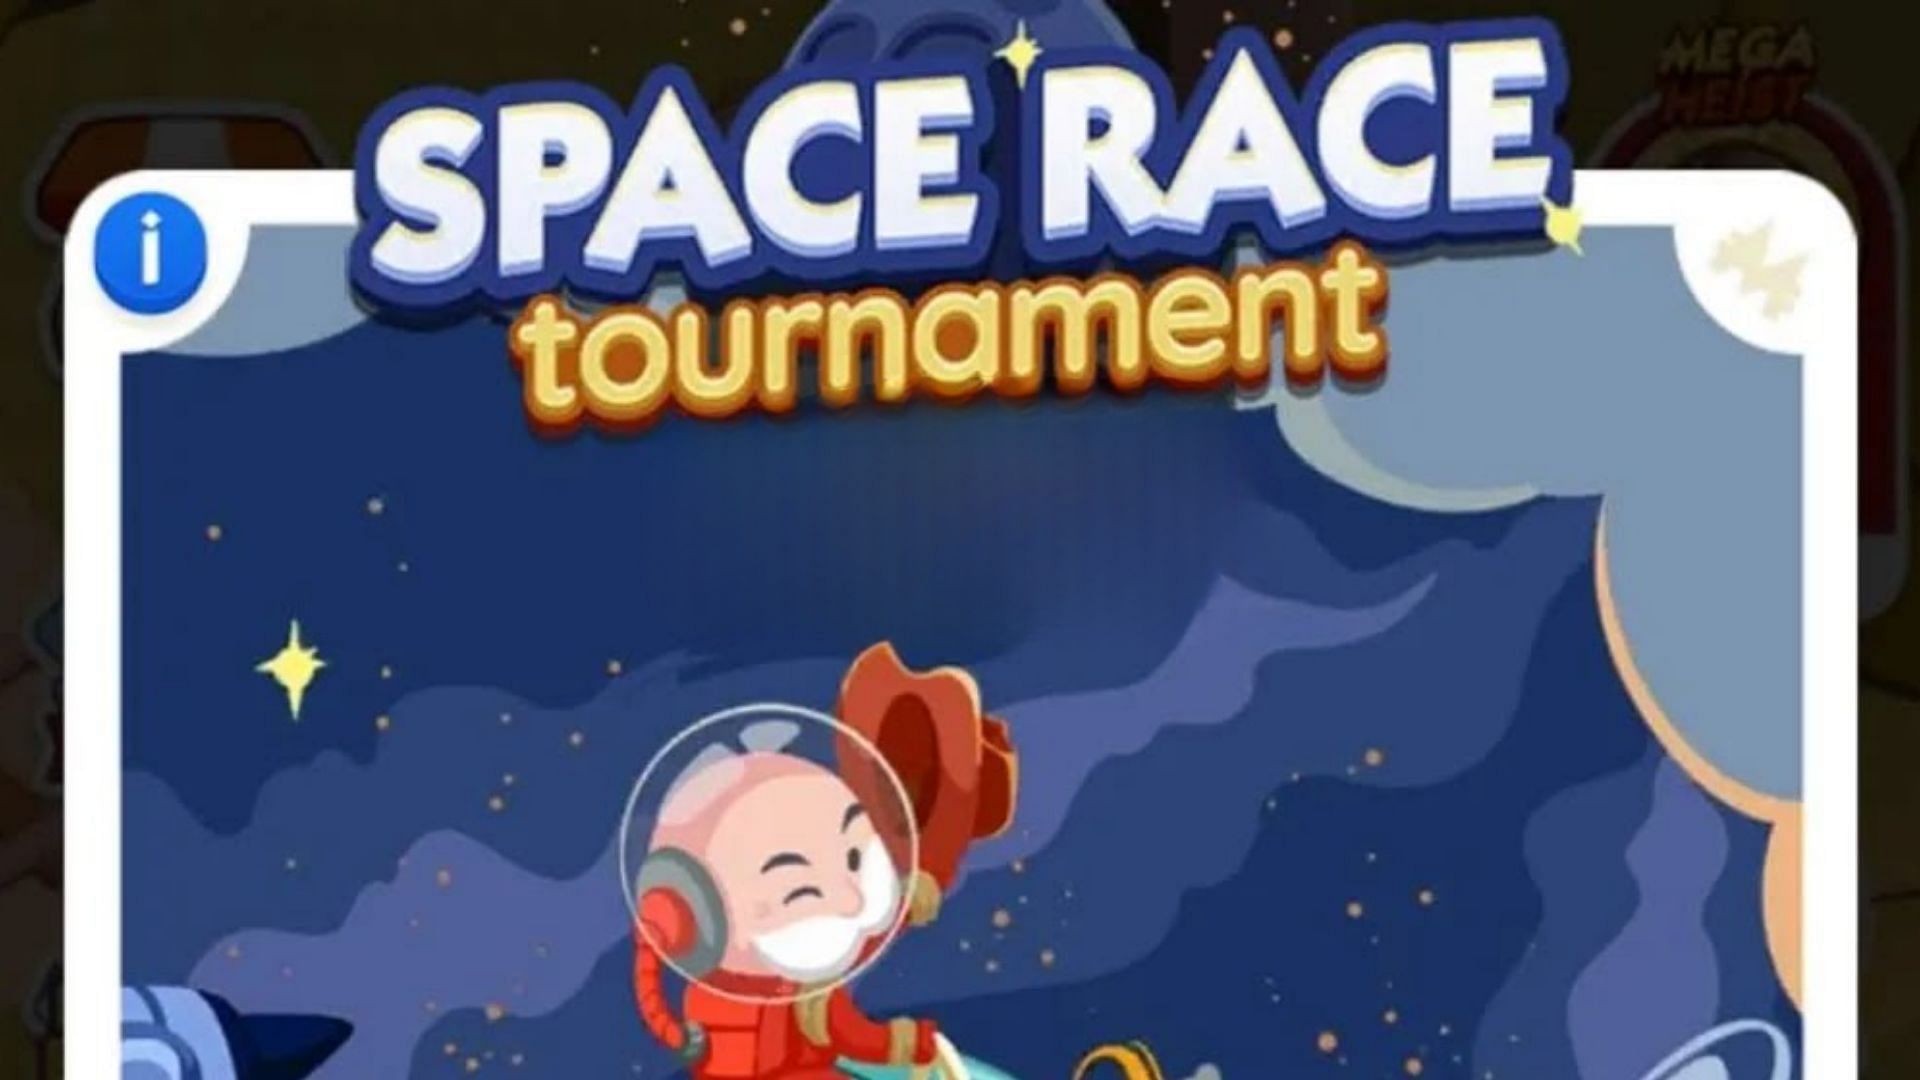 Monopoly Go Space Race tournament is now available in the title (Image via Scopely) 